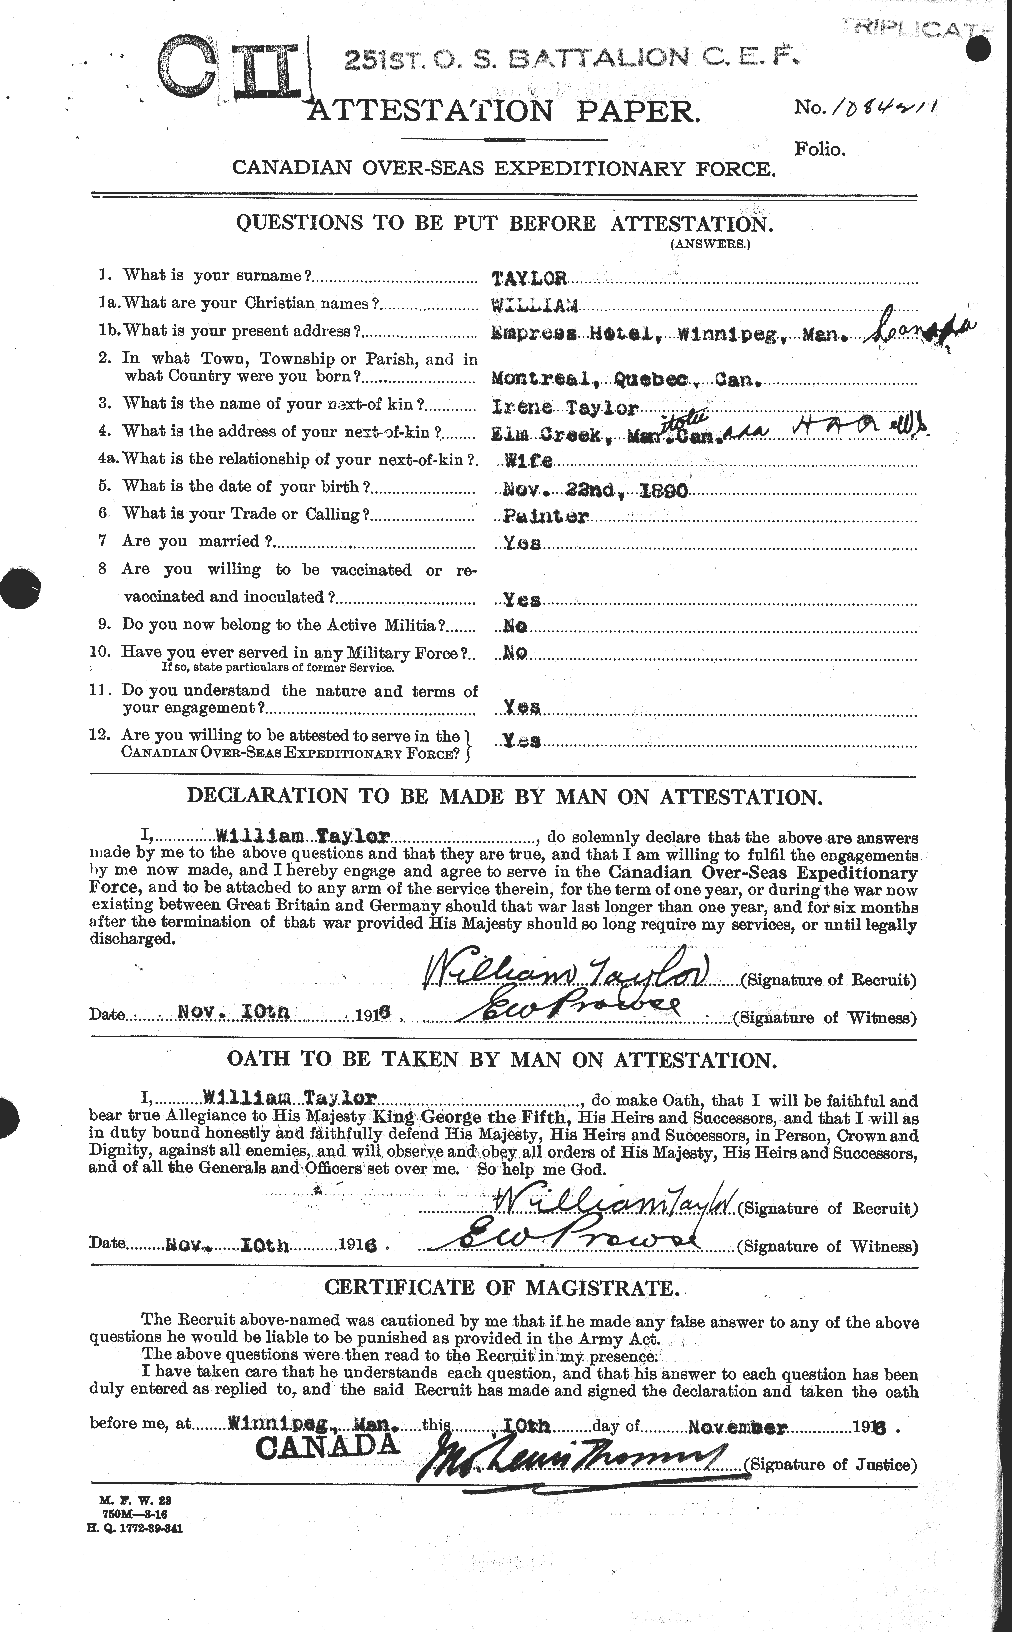 Personnel Records of the First World War - CEF 628179a